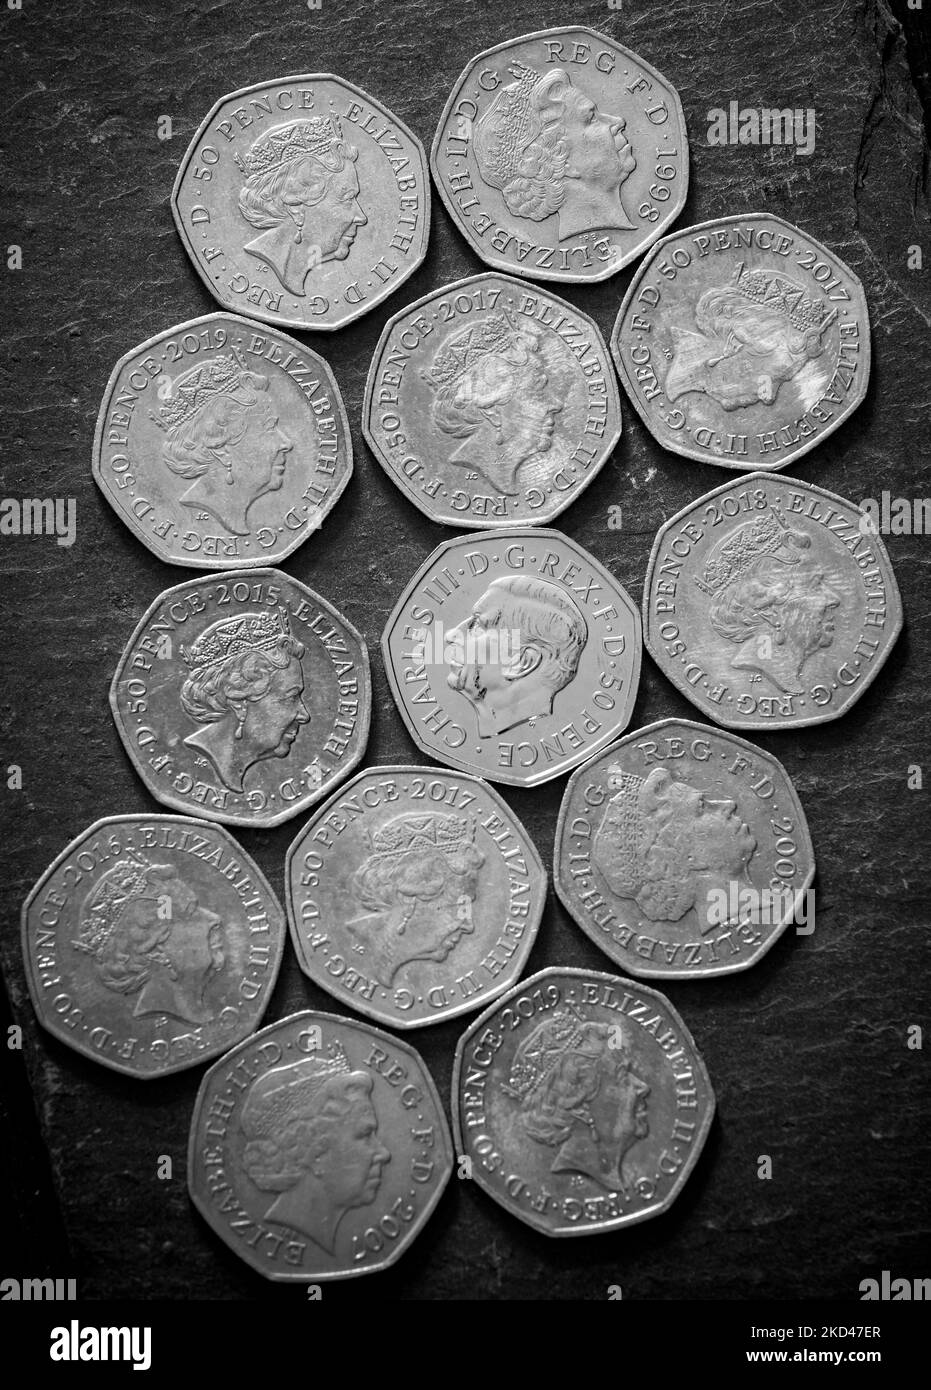 Collection of Fifty pence pieces, including the new Fifty pence piece featuring King Charles III portrait Stock Photo